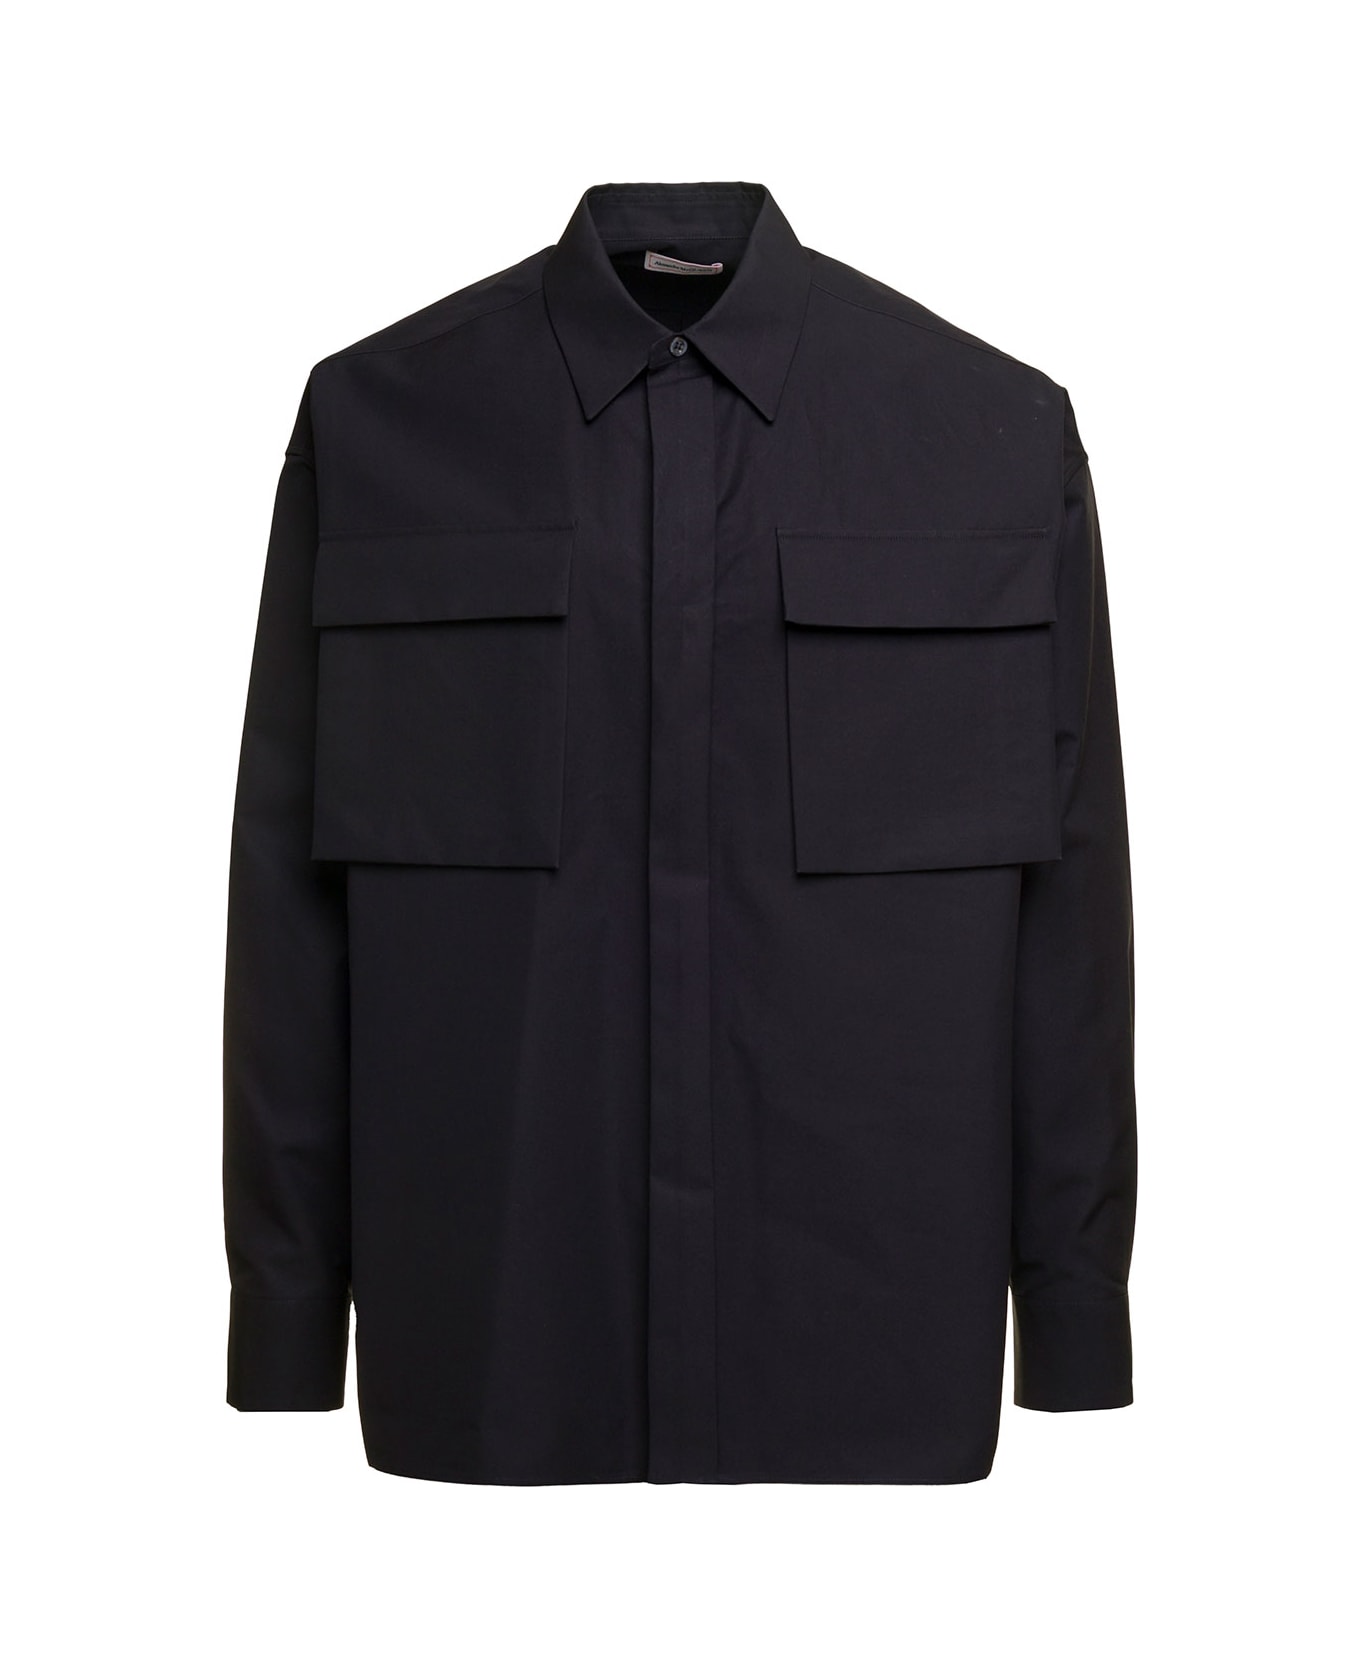 Alexander McQueen Oversized Shirt With Patch Pockets With Flaps - Black シャツ